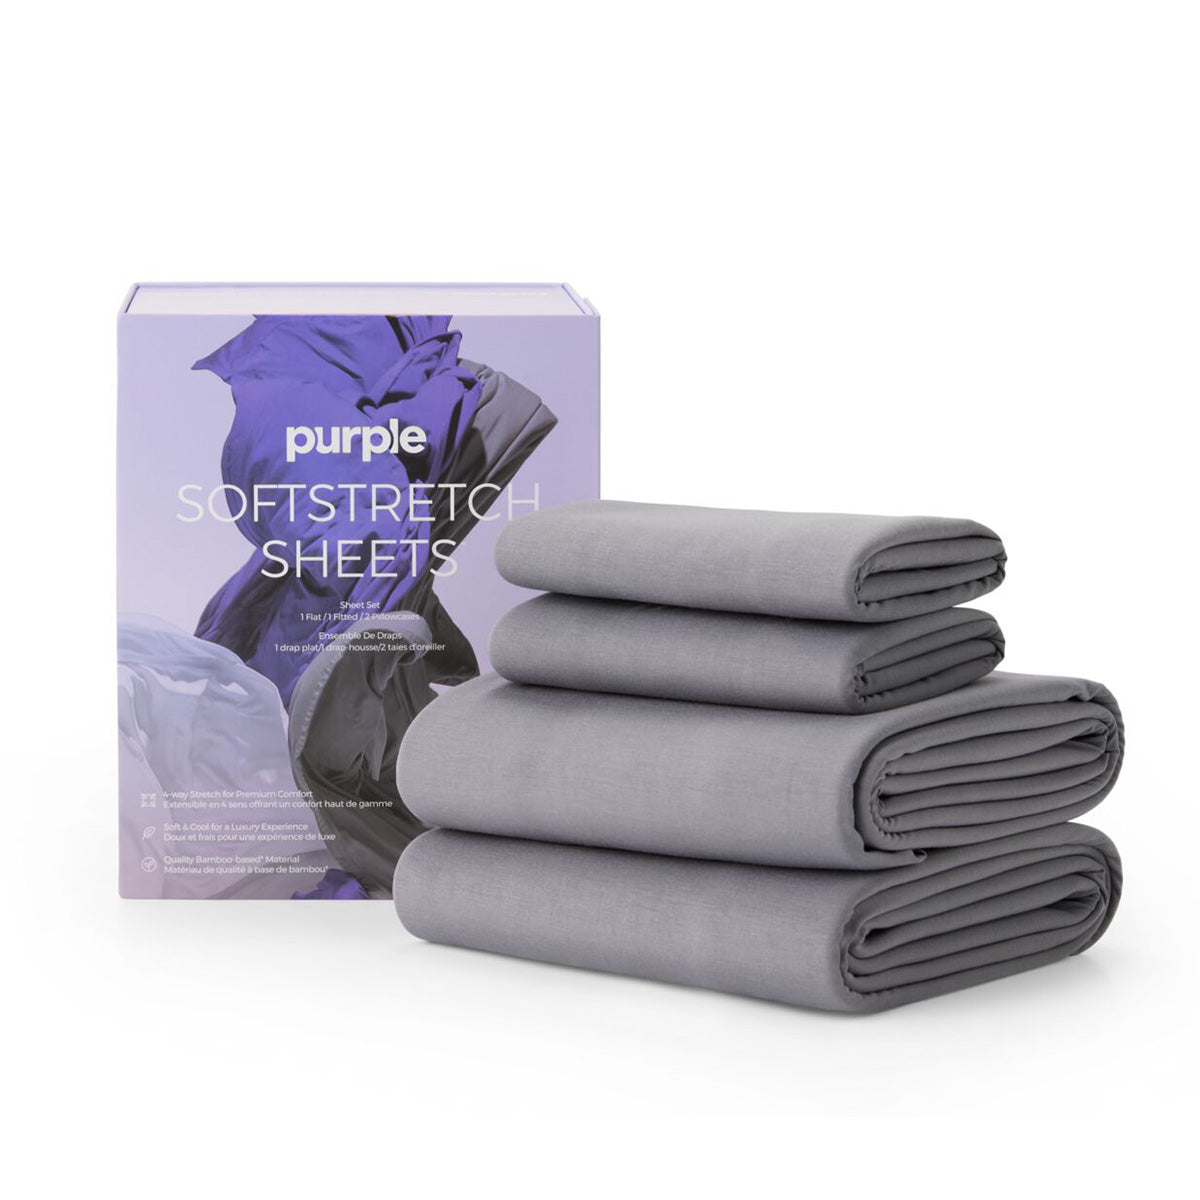 Purple SoftStretch Sheets Packaging and Sheets In Gray